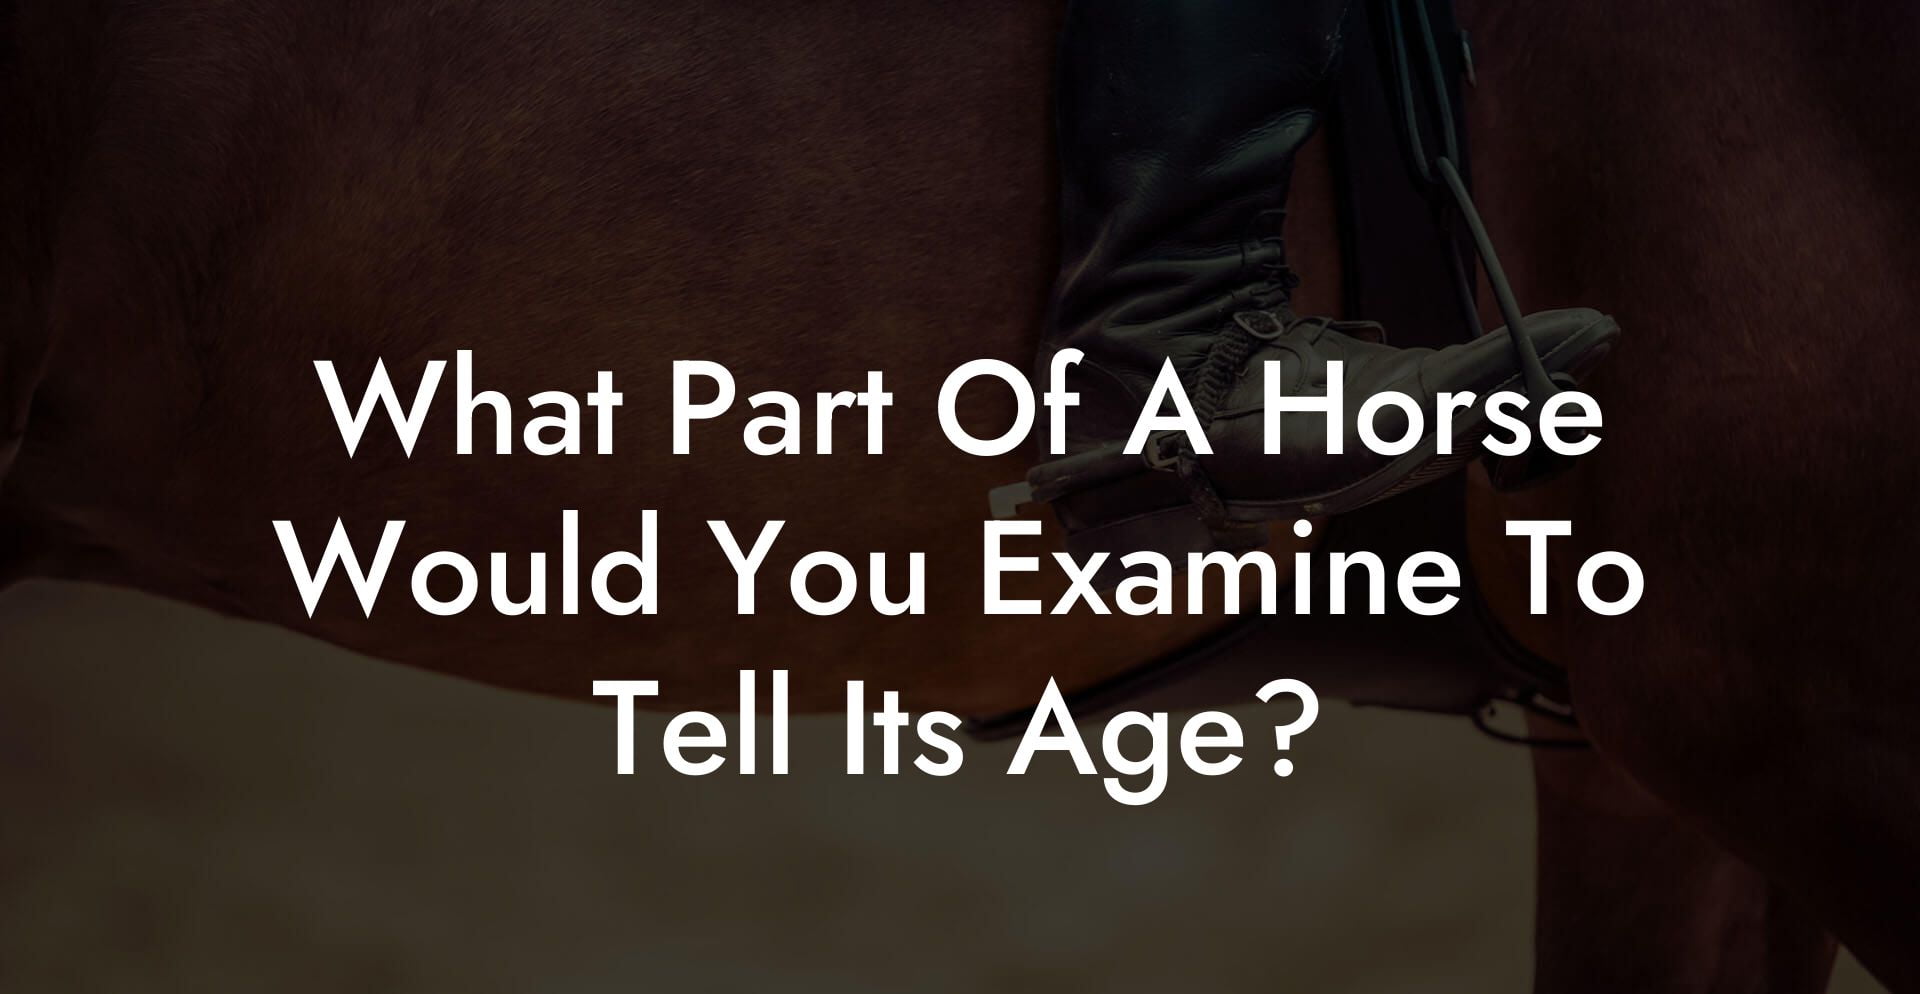 What Part Of A Horse Would You Examine To Tell Its Age?